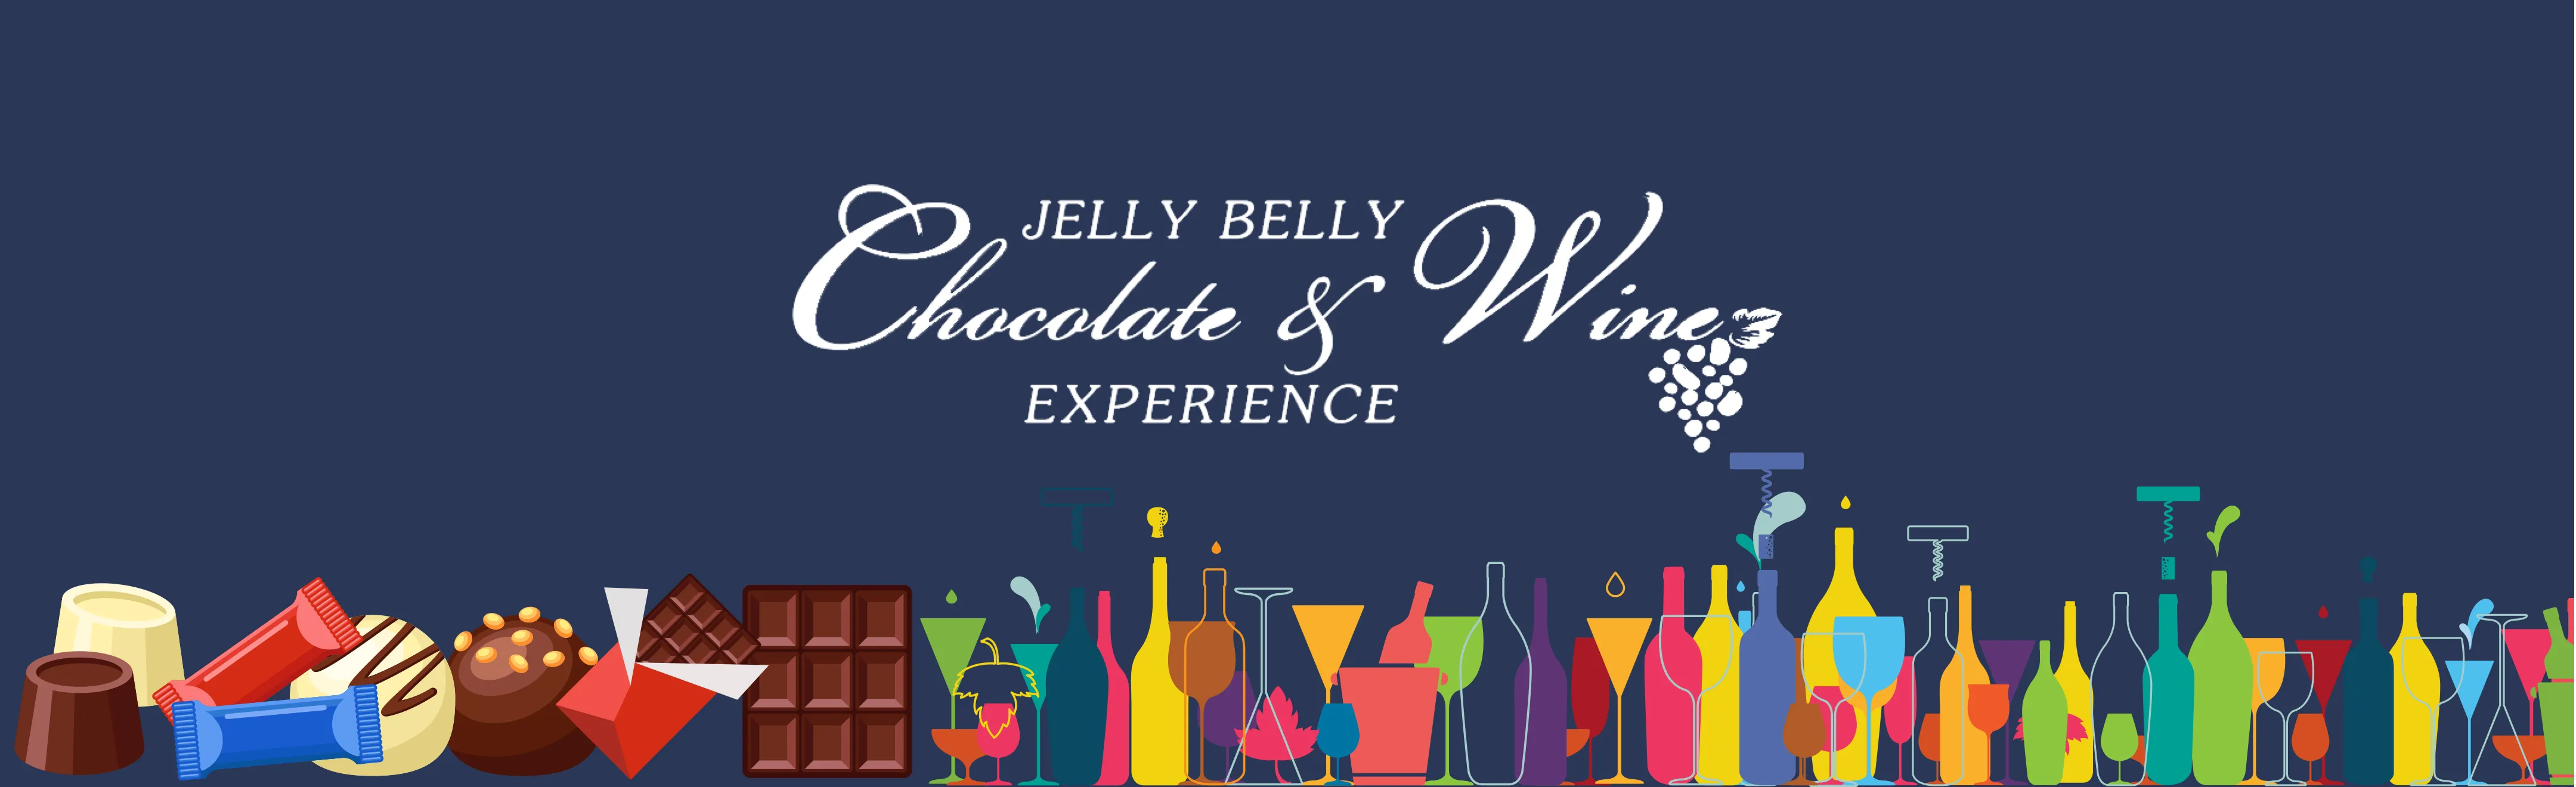 Jelly Belly Chocolate and Wine Experience